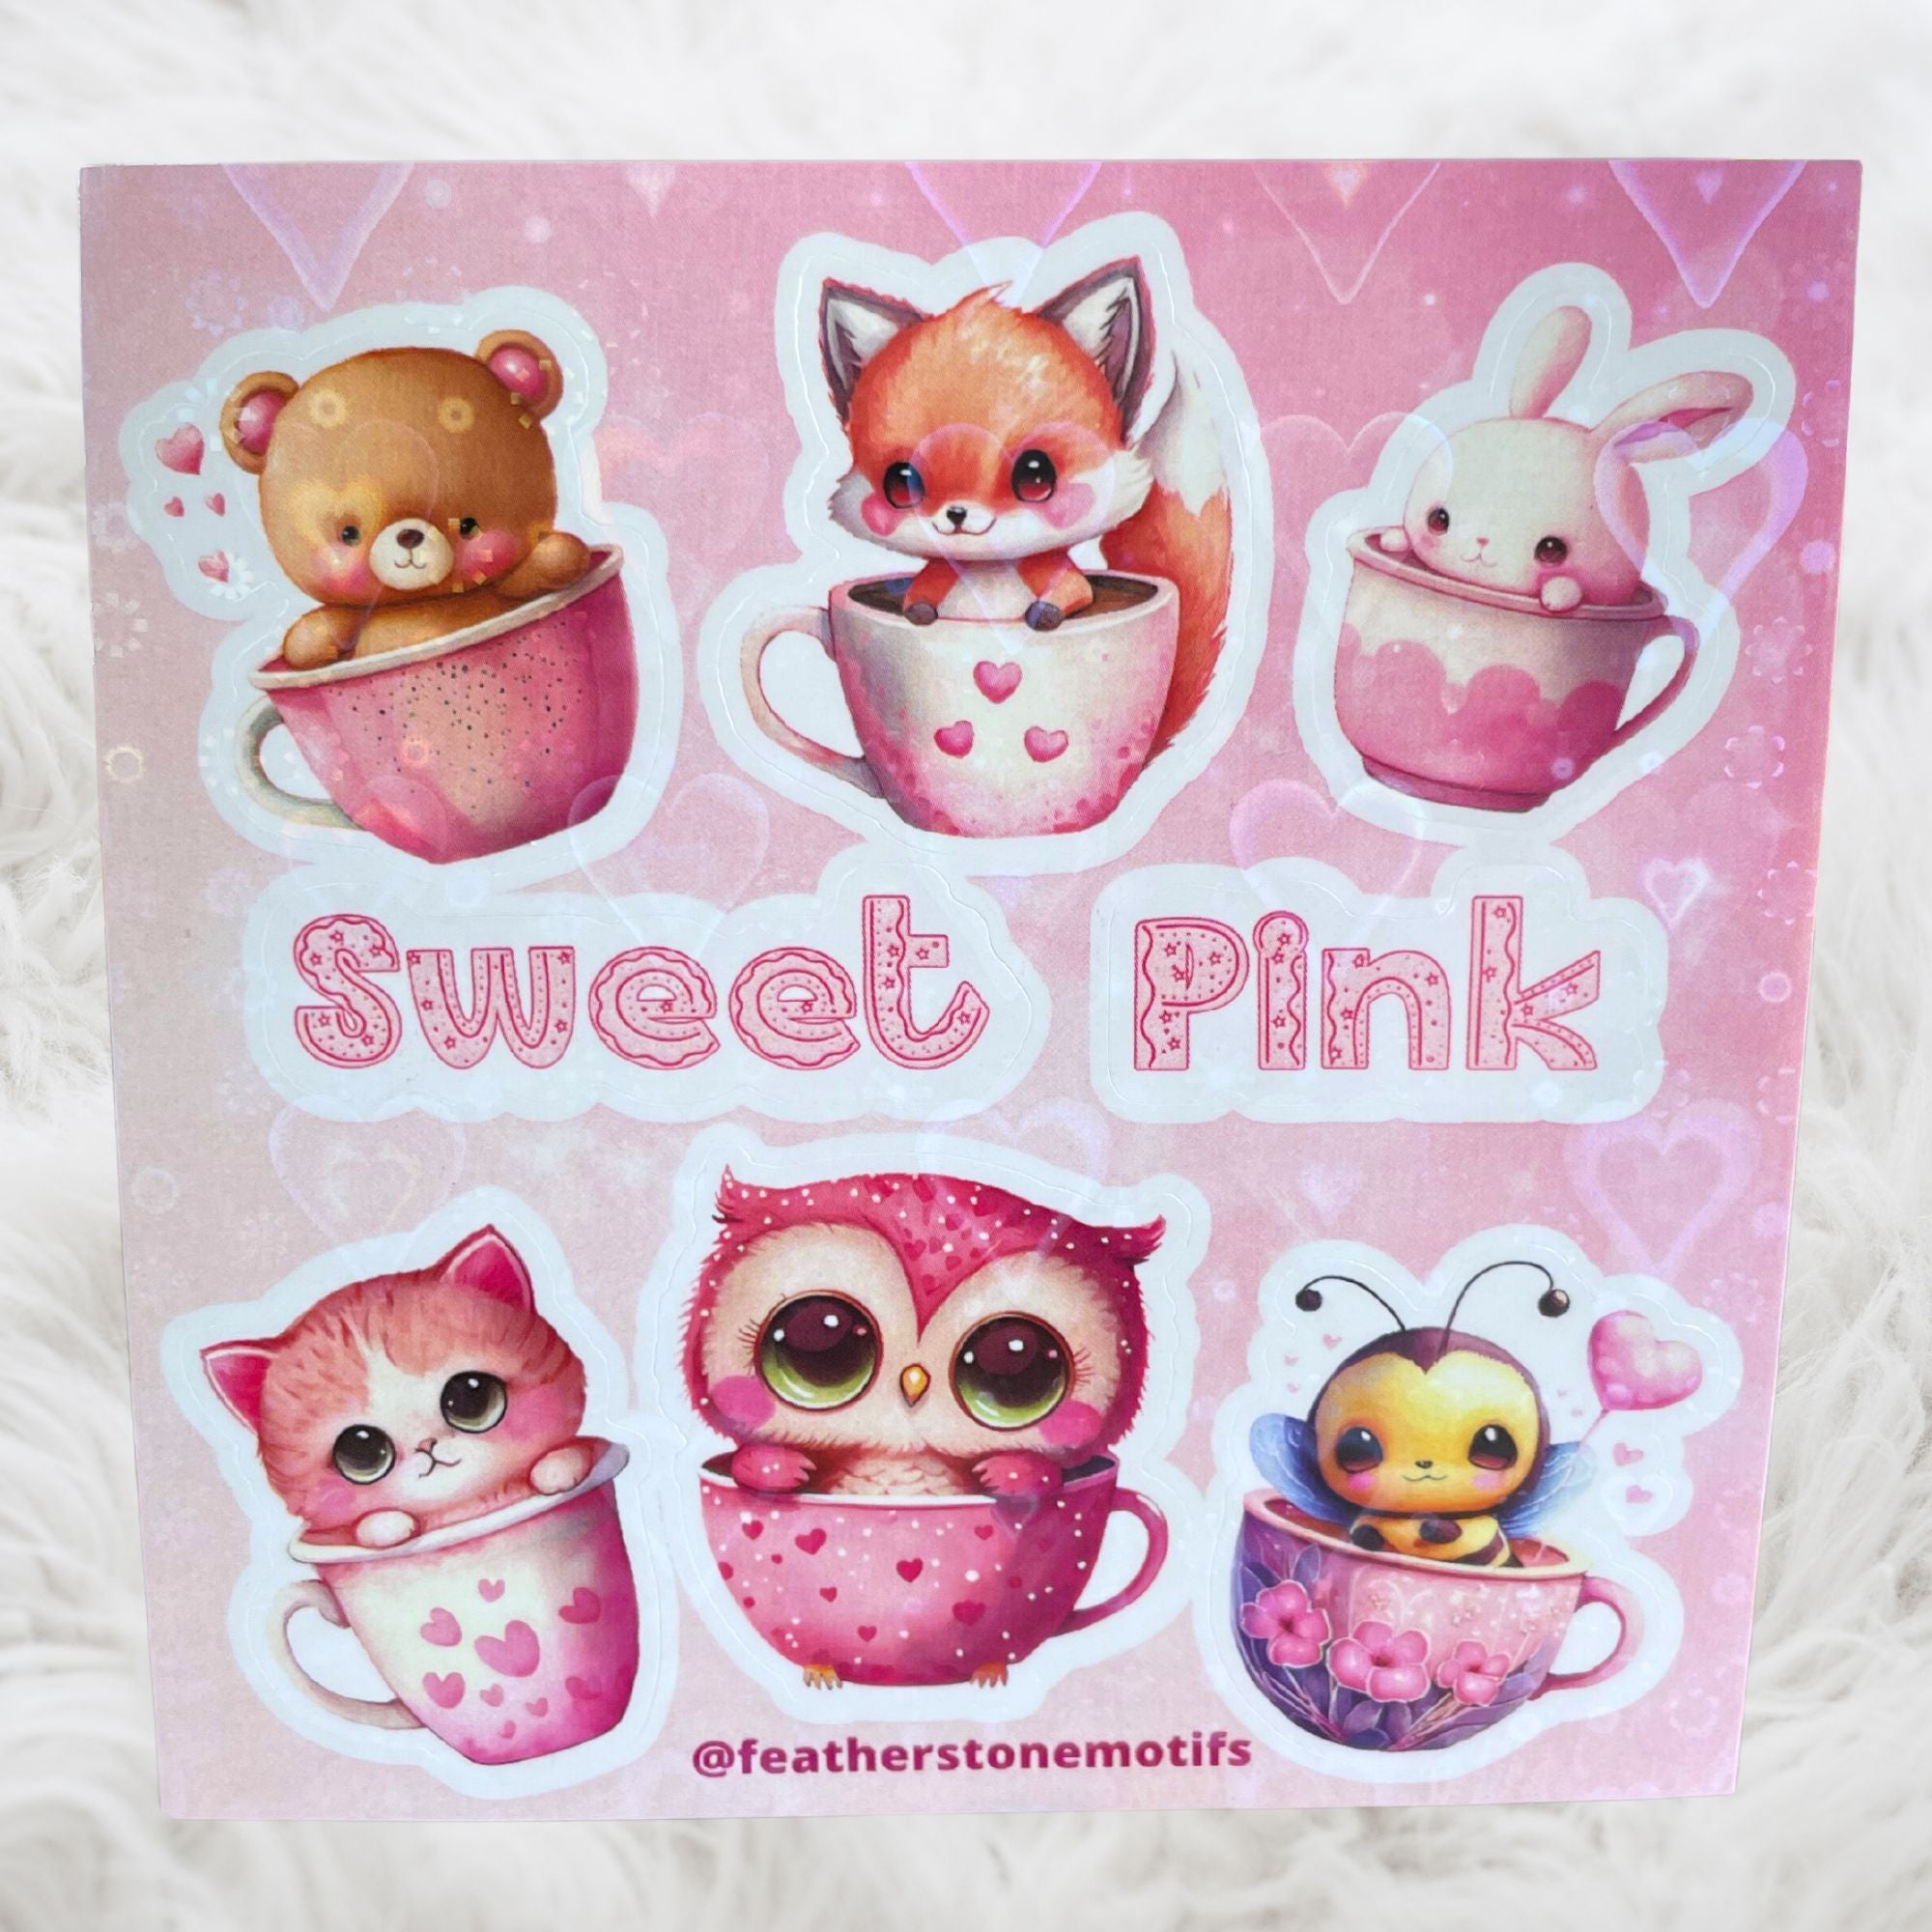 This image shows the Sweet Pink mini sheet with the holographic hearts overlay